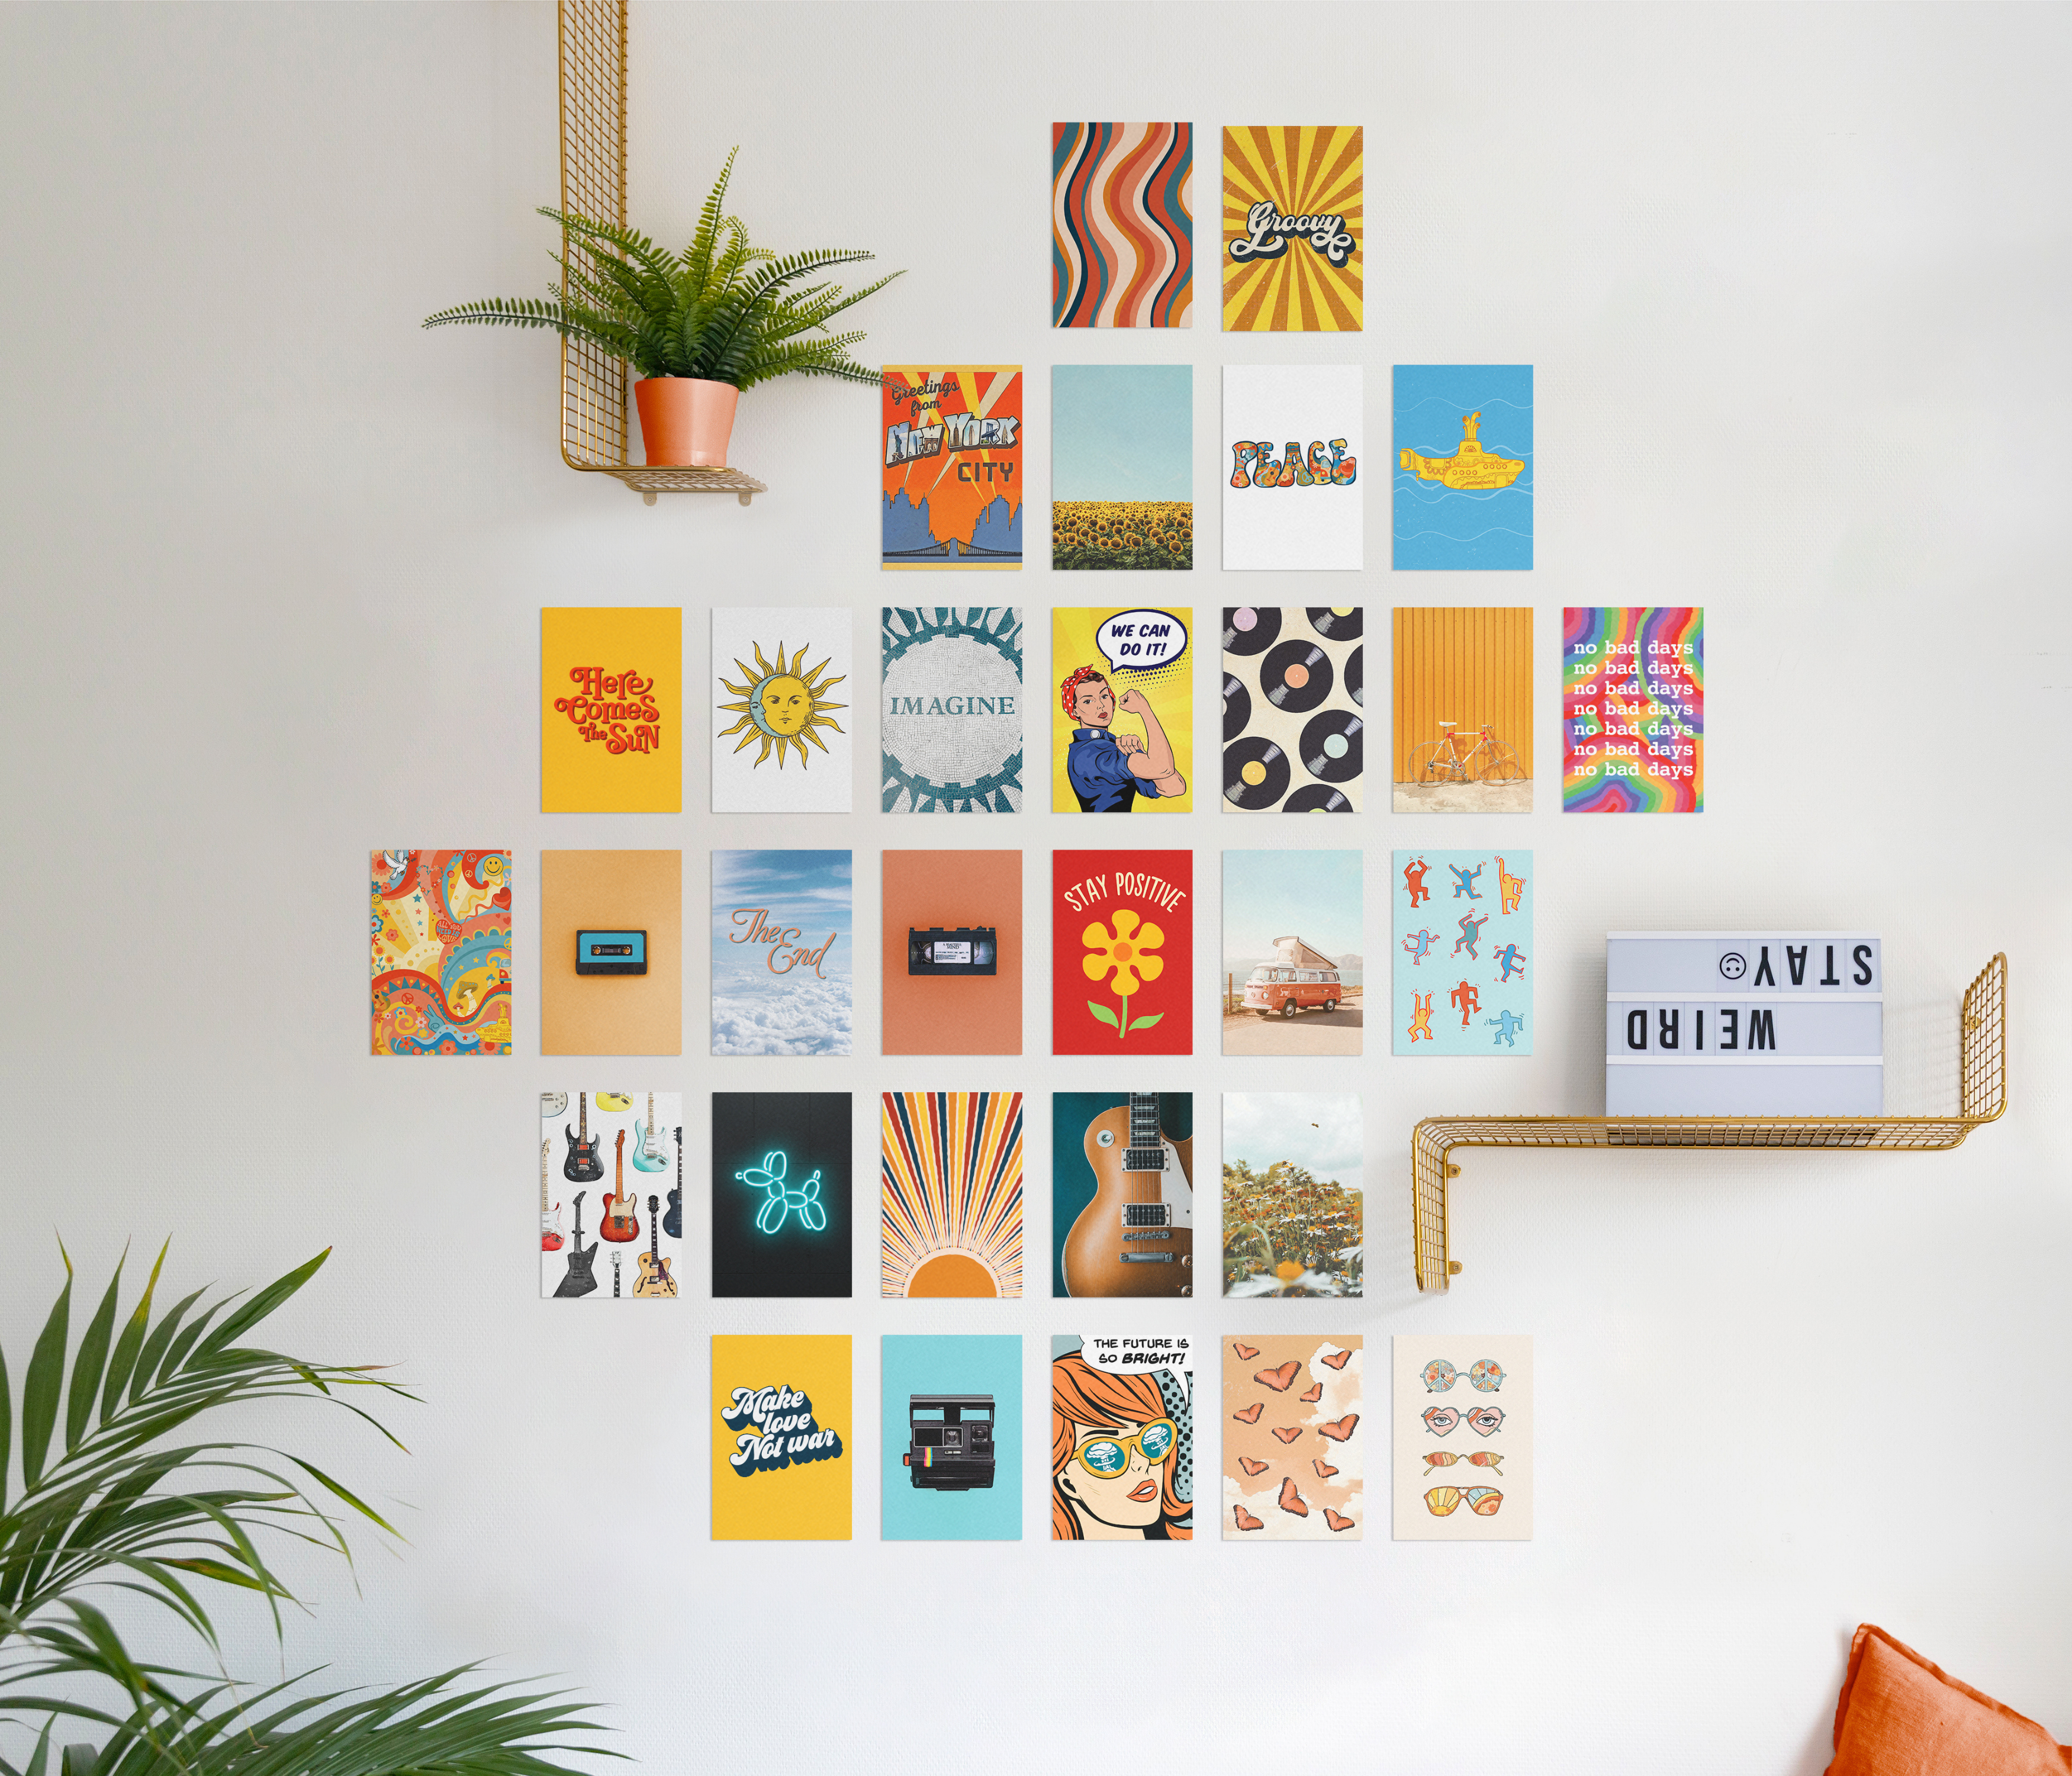 How to hang posters without damaging walls: 6 damage-free ways